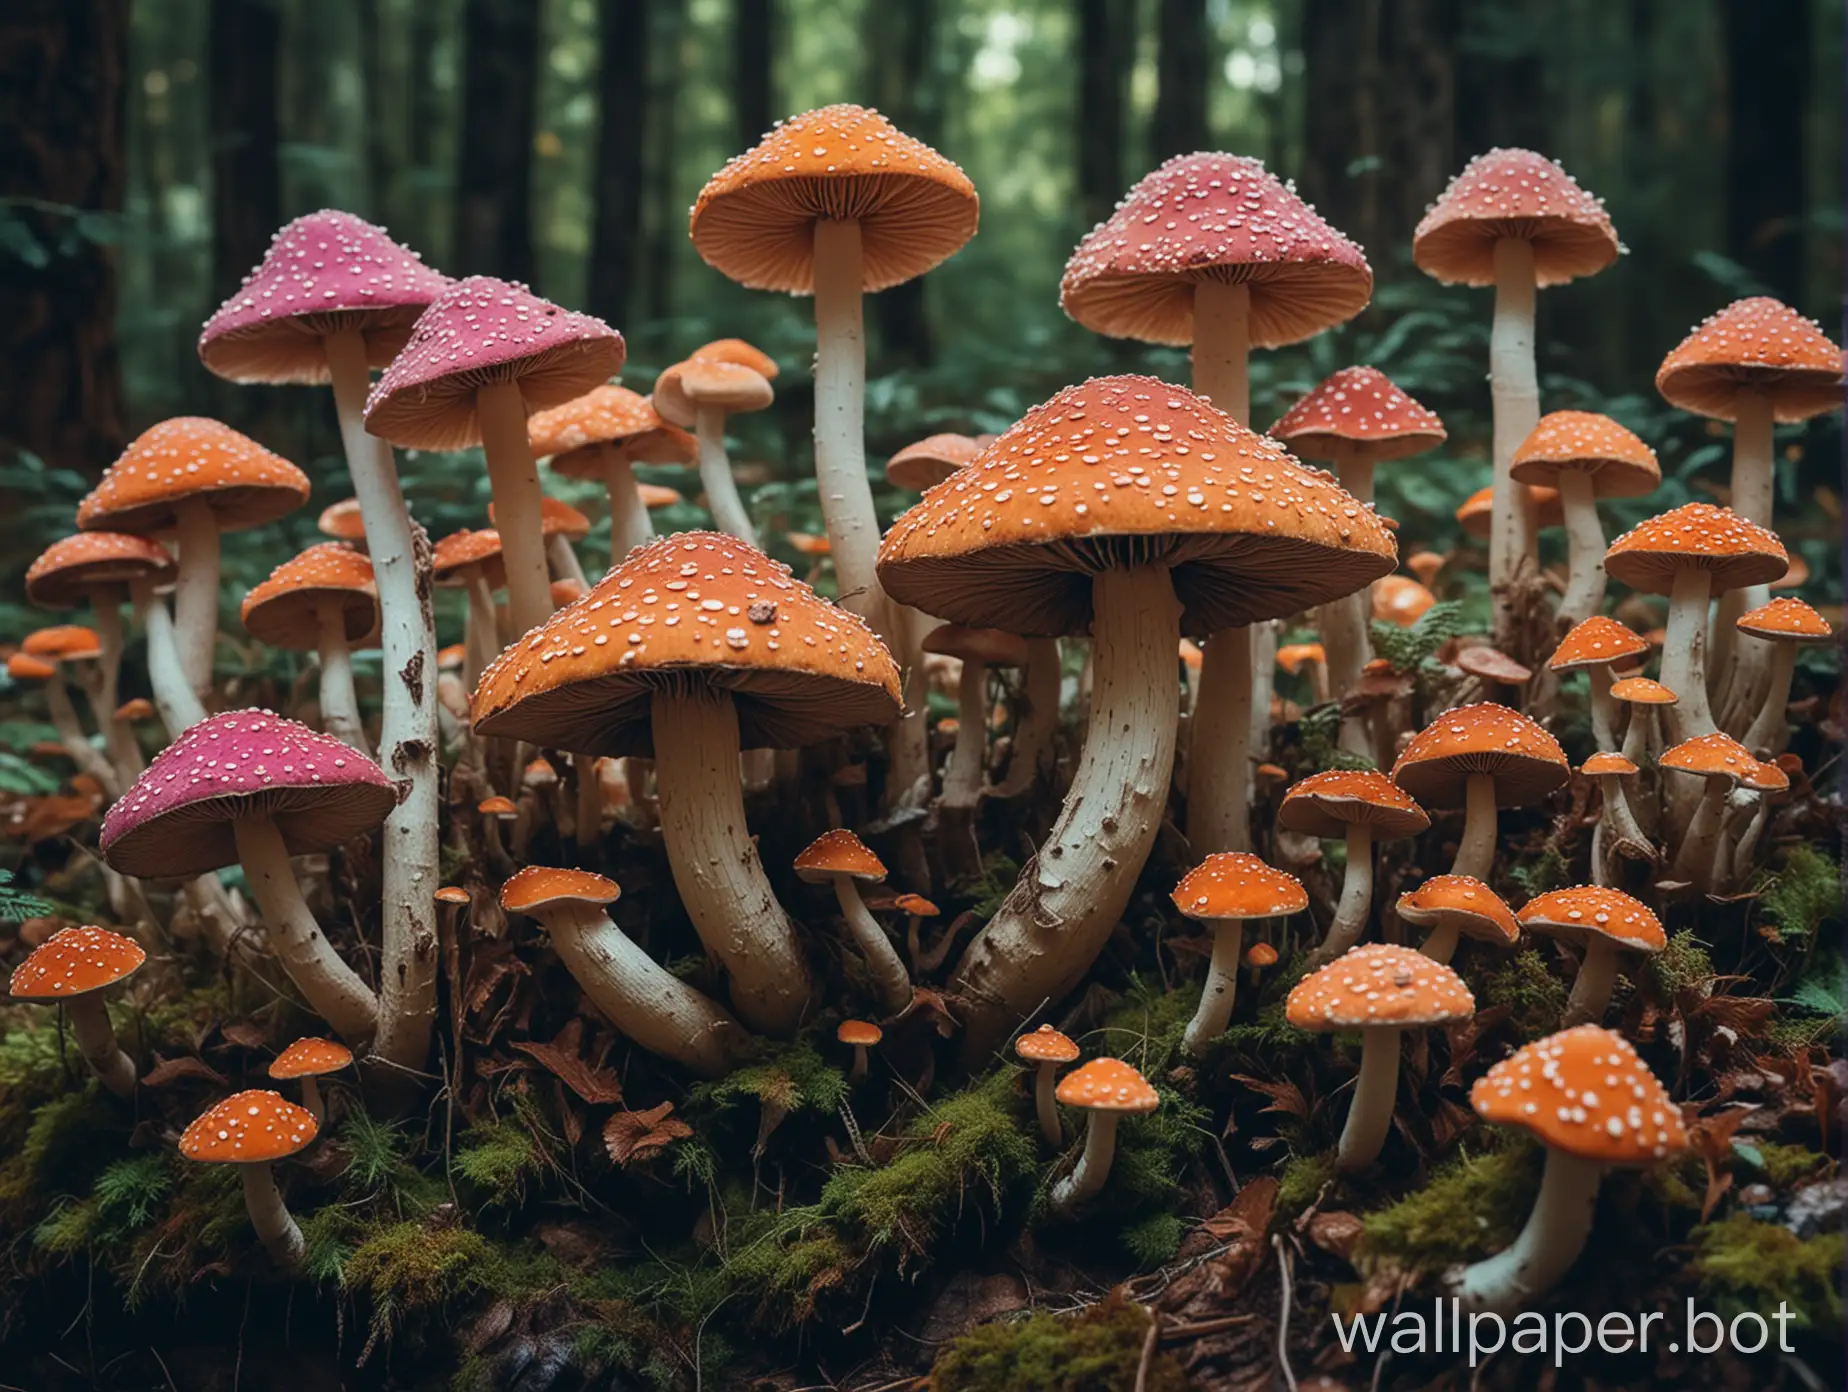 generate psychedelic products, mushrooms, innovative